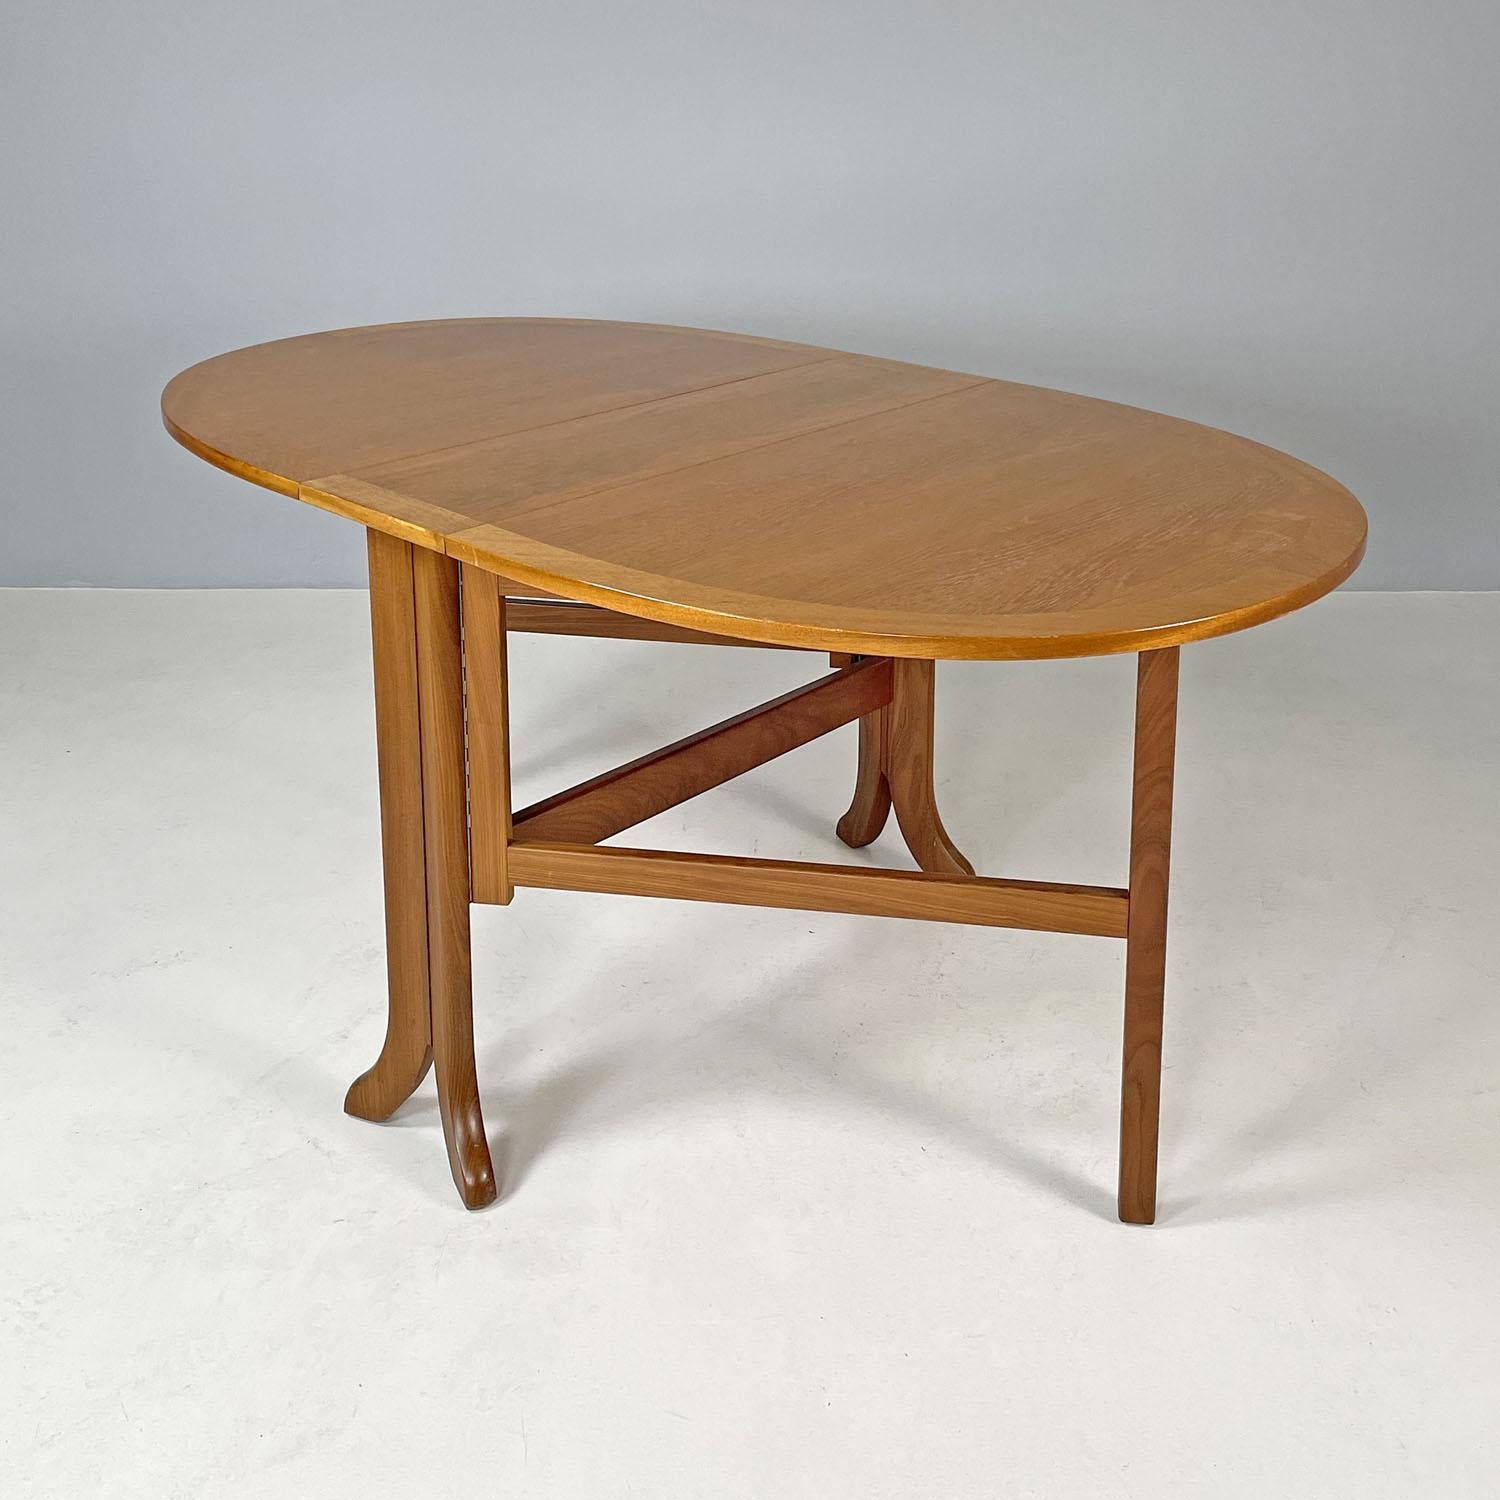 English mid-century modern wooden dining table with flap doors, 1960s
Dining table made entirely of wood. It has a fixed rectangular central top, which corresponds to two lateral semicircular folding doors, so that once both are opened the table has